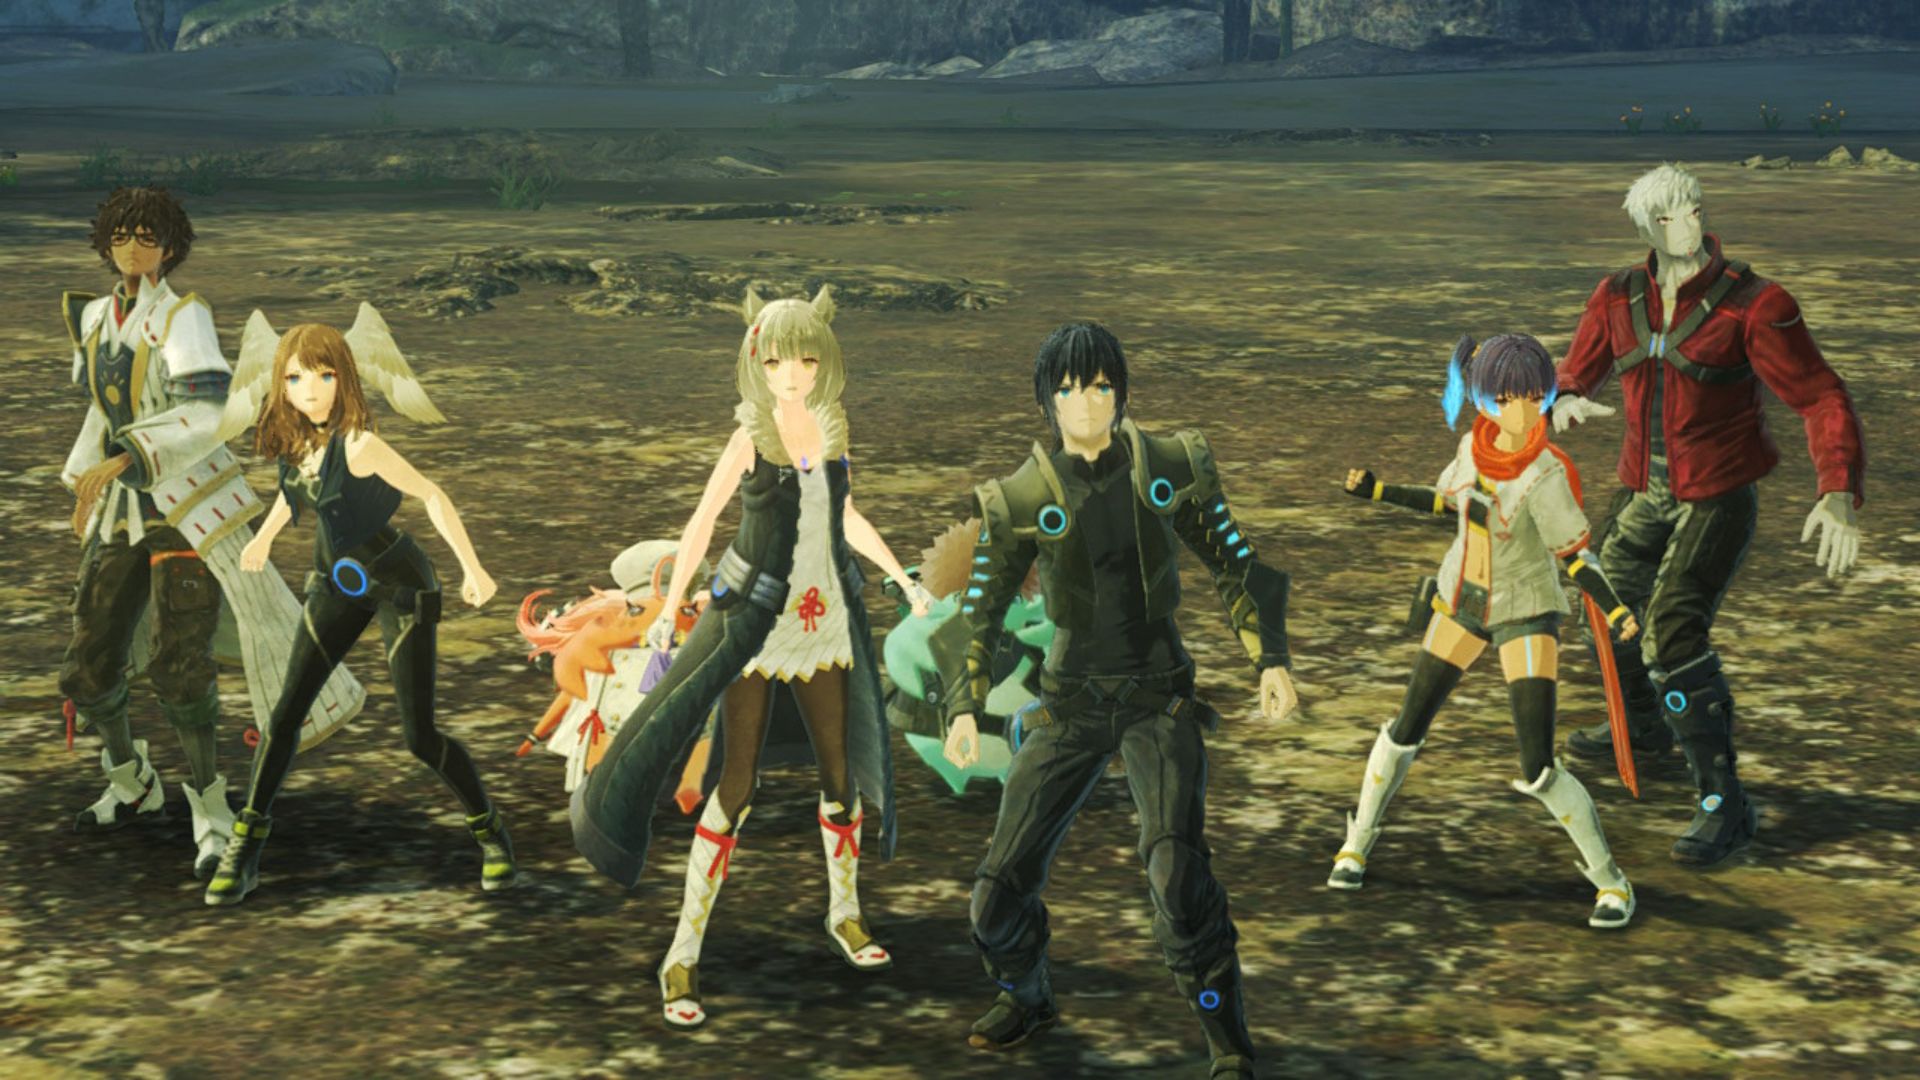 Xenoblade Chronicles 3 is a “stopping point” for Takahashi